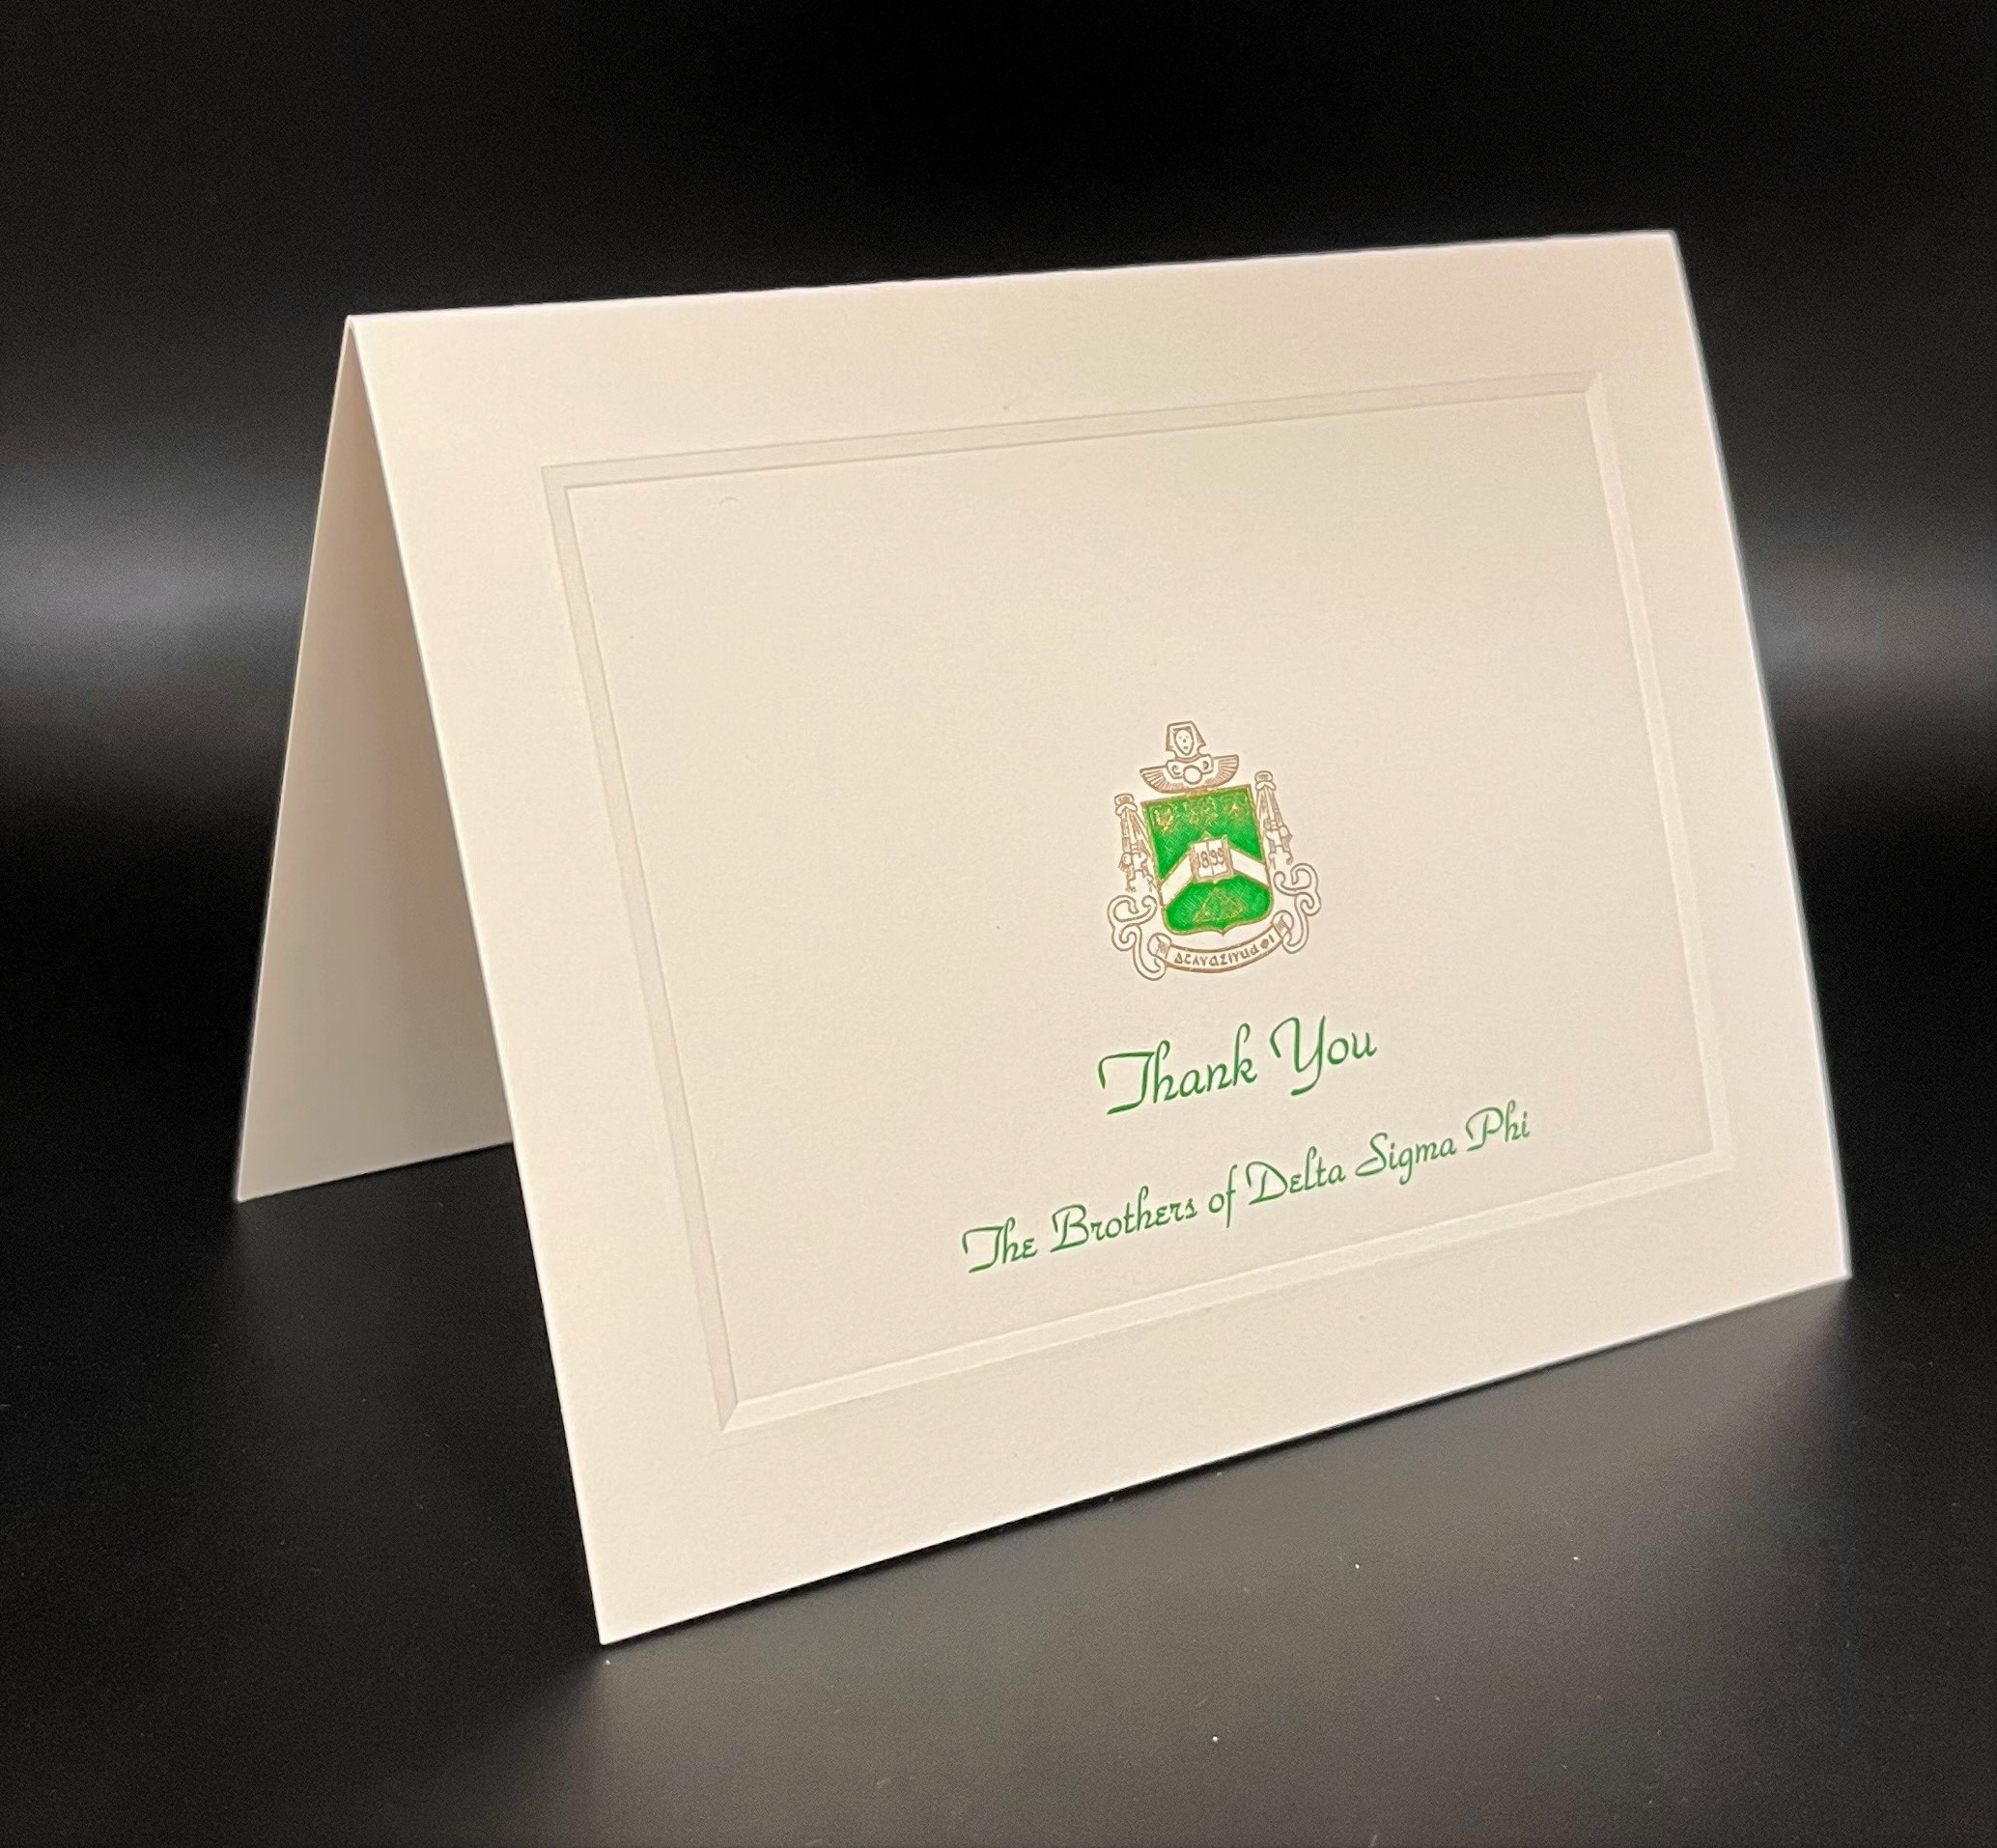 Engraved Thank You Cards Delta Sigma Phi